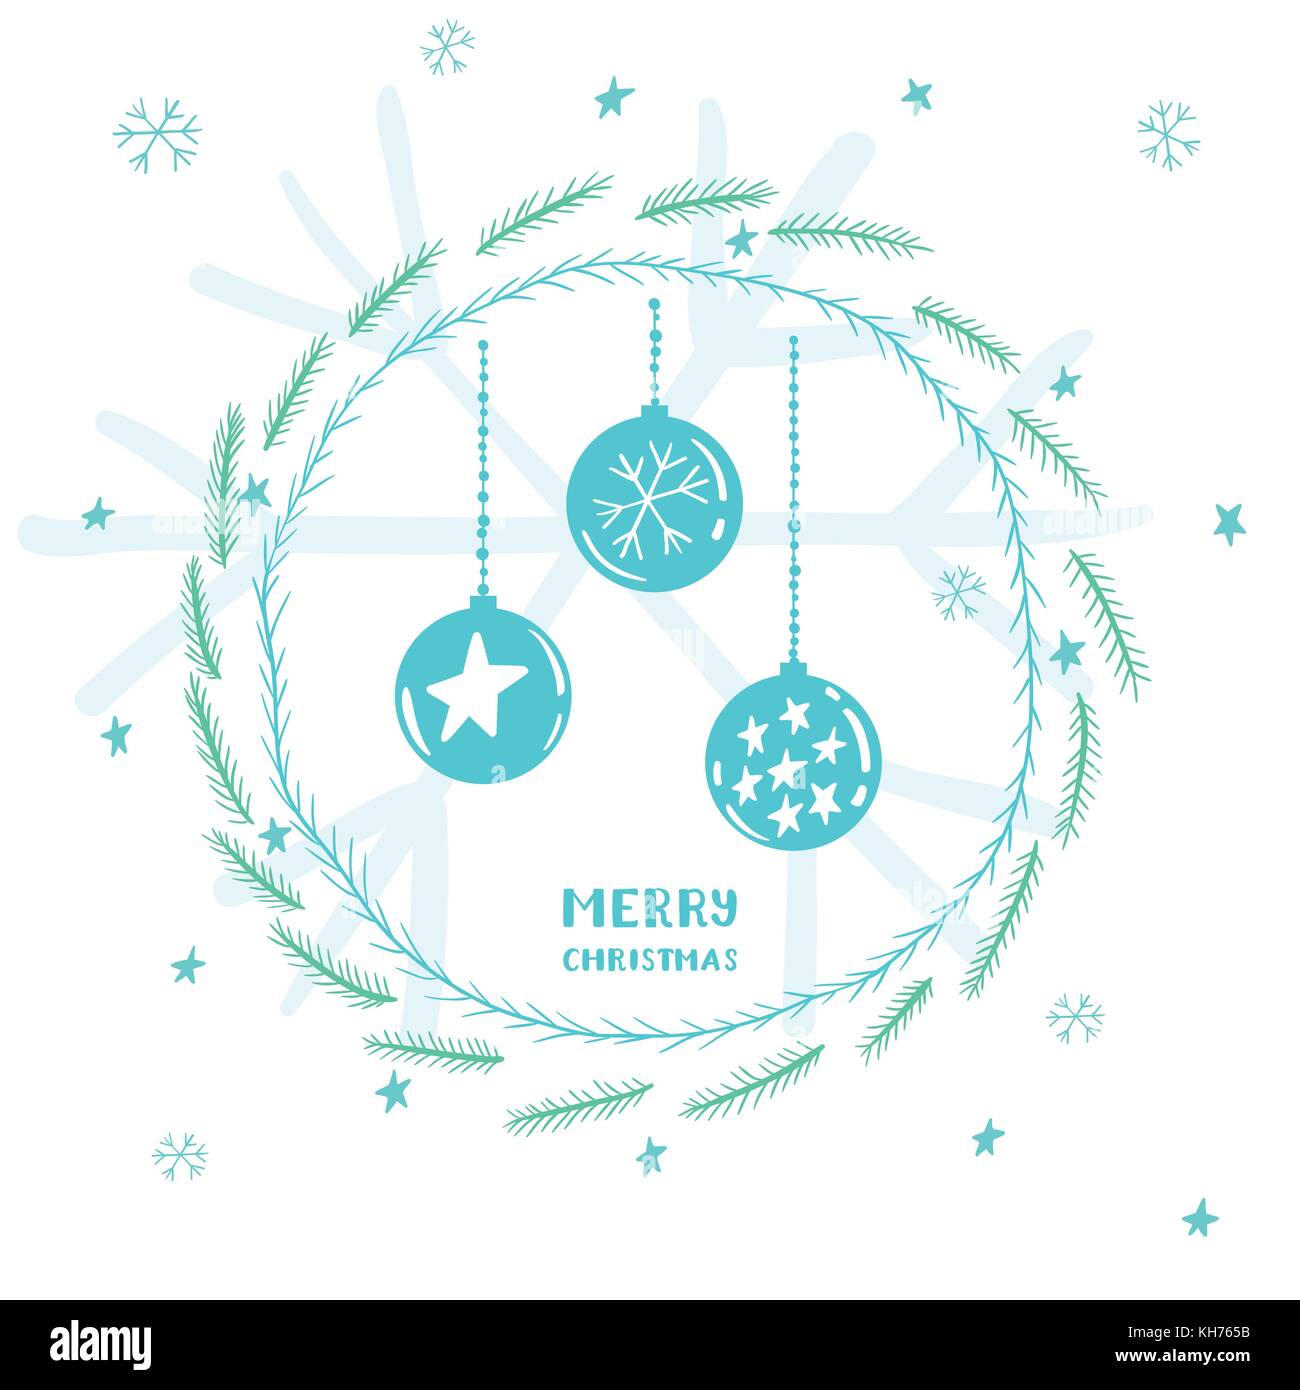 Cute Christmas card with hanging decorations, round frame of spruce branches, stars and snowflakes Stock Vector